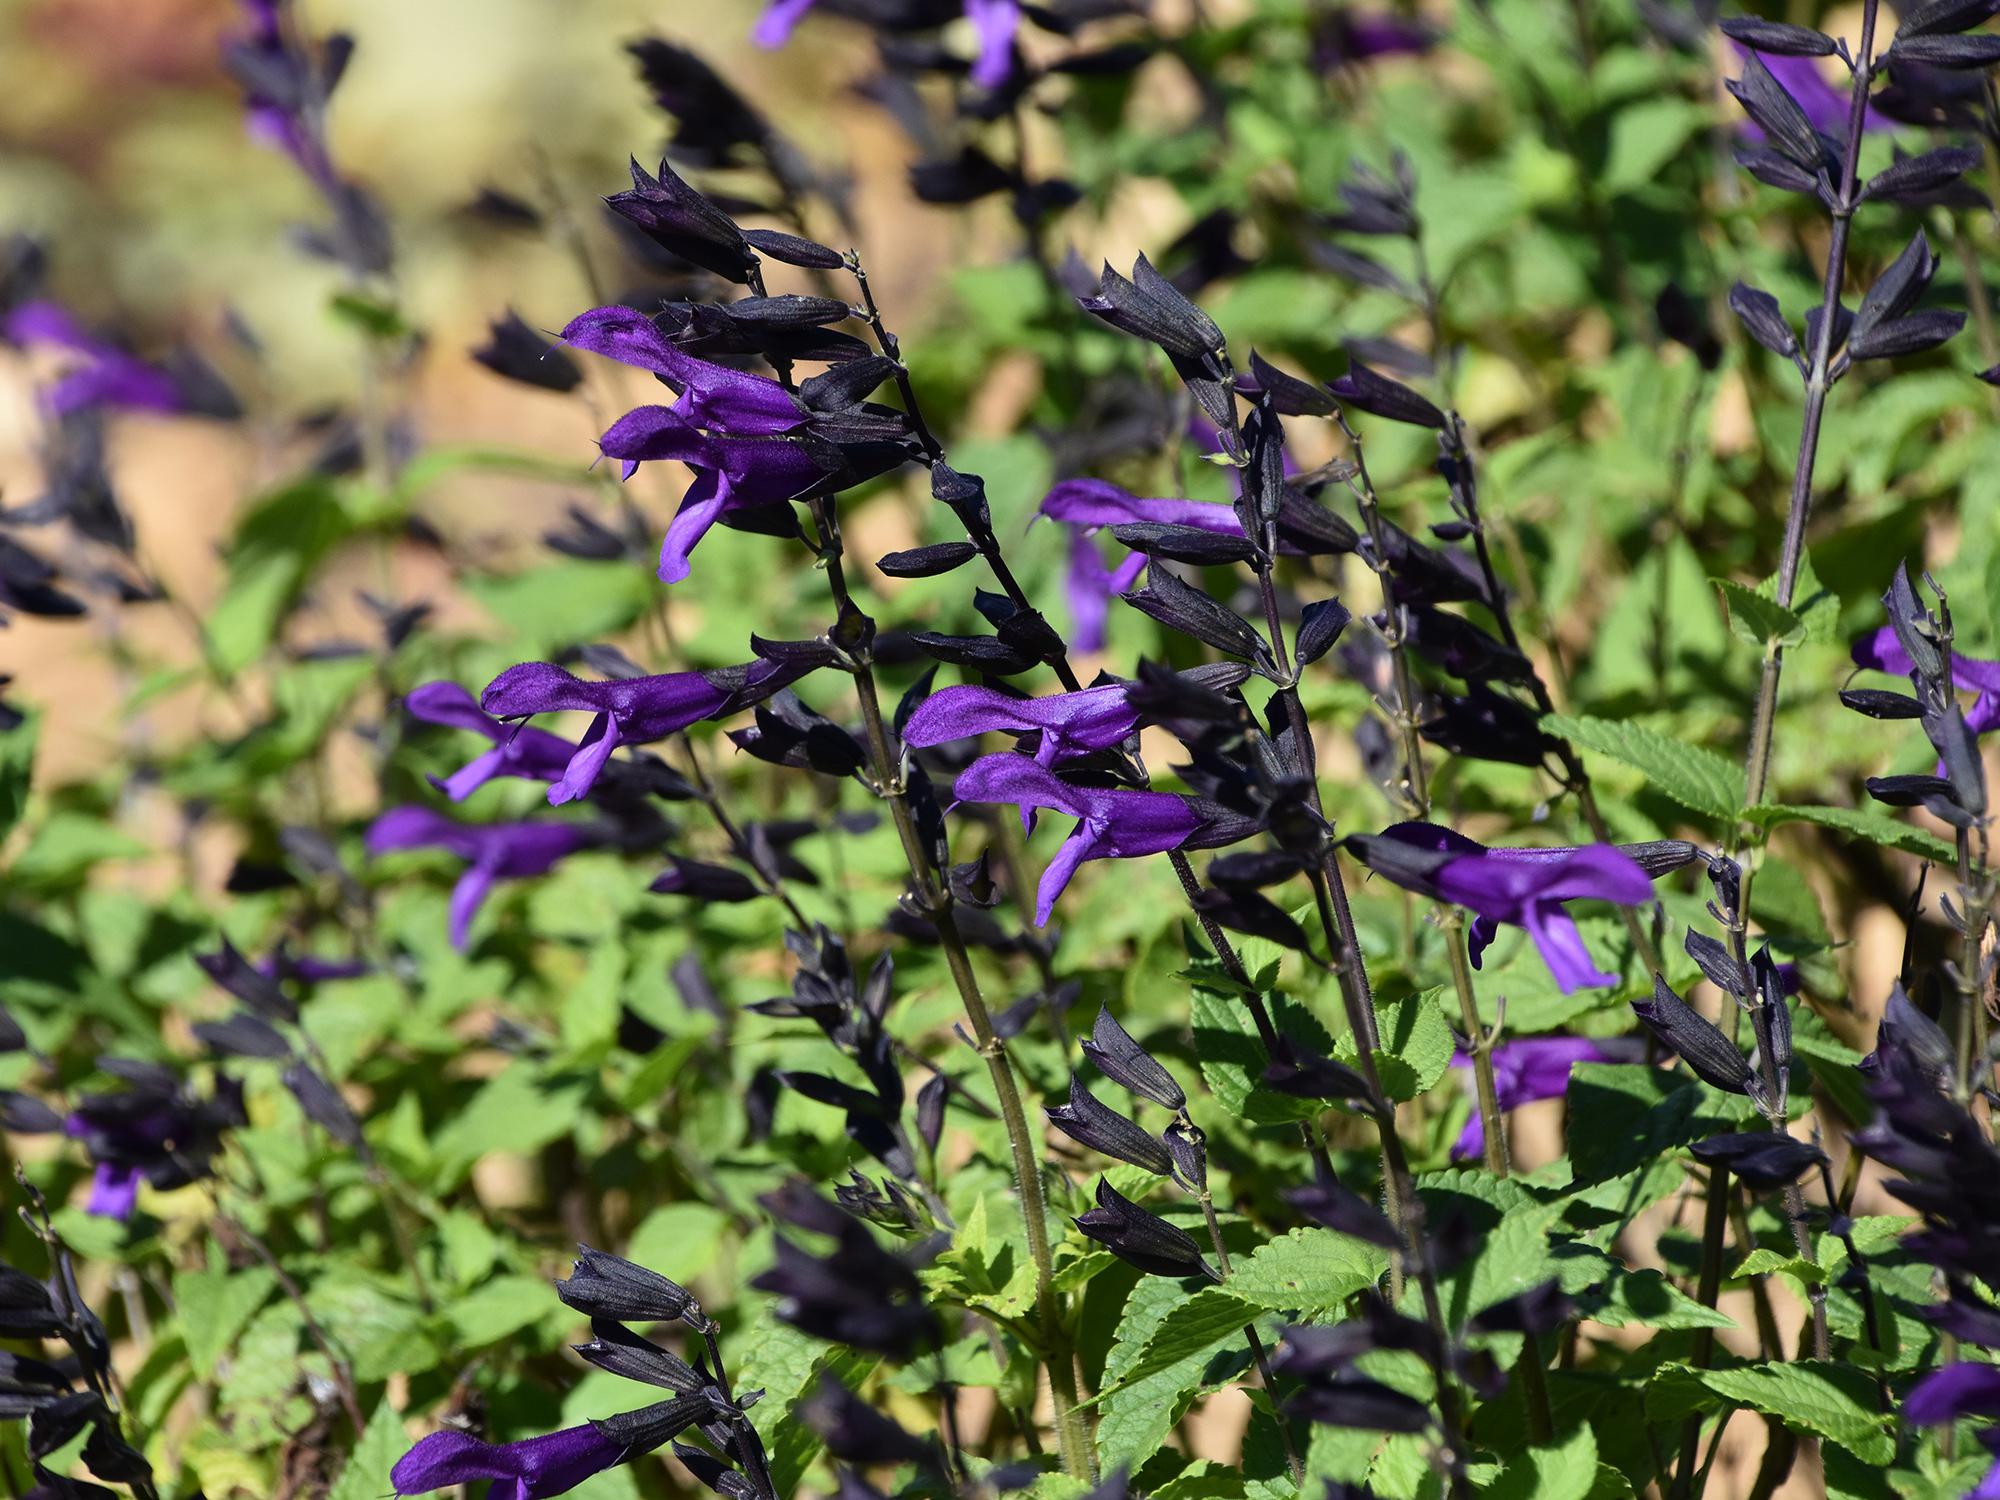 Small, vivid purple flowers bloom from dark spikes against a green background.